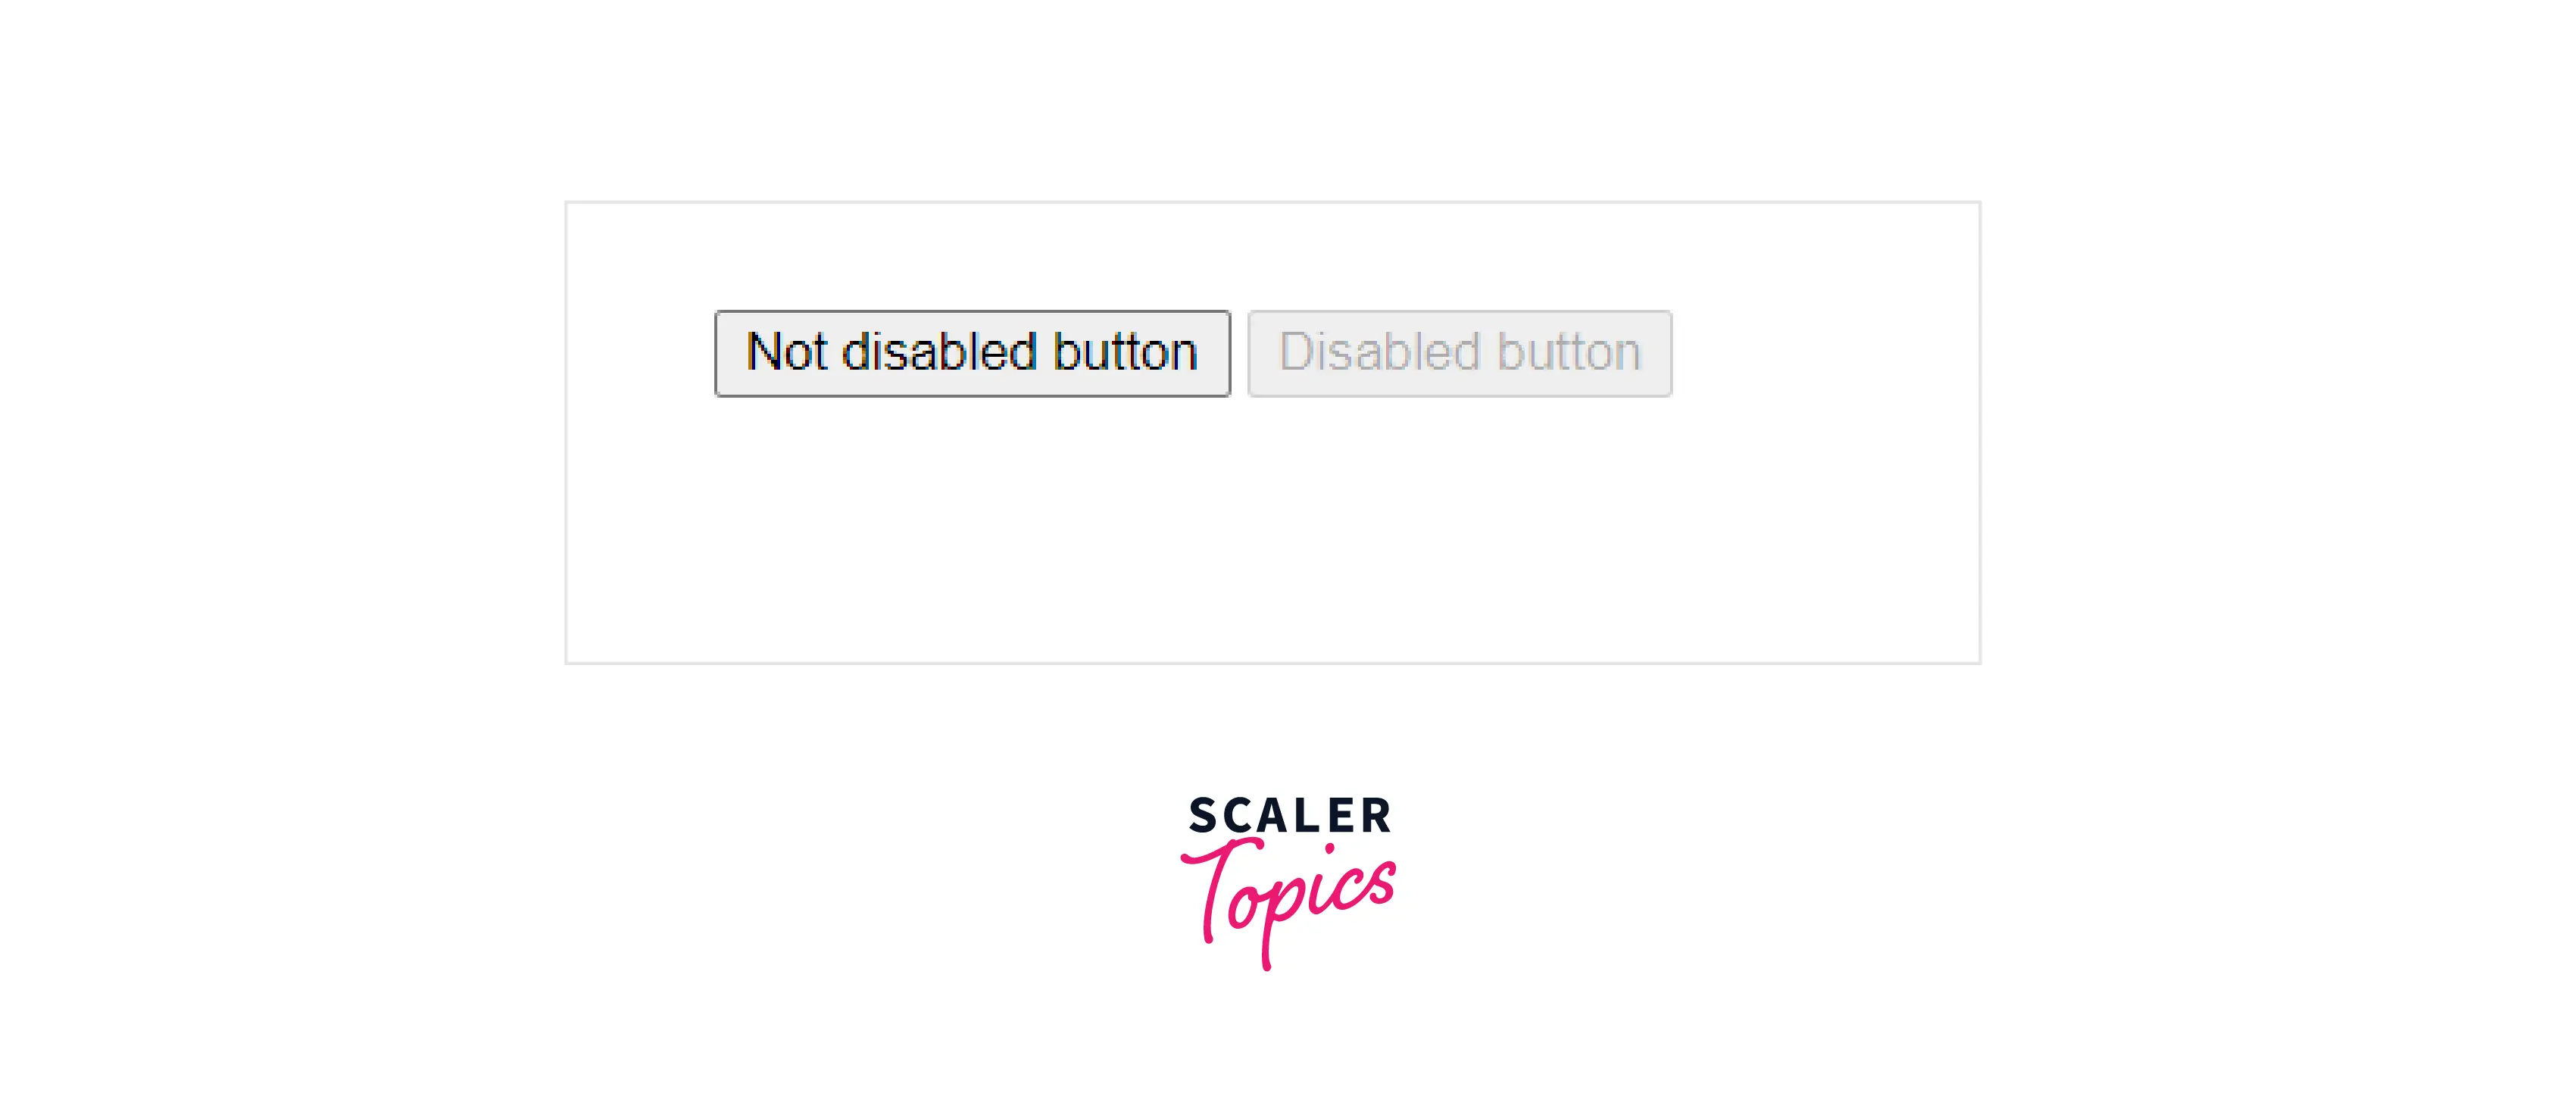 implementation-of-disable-button